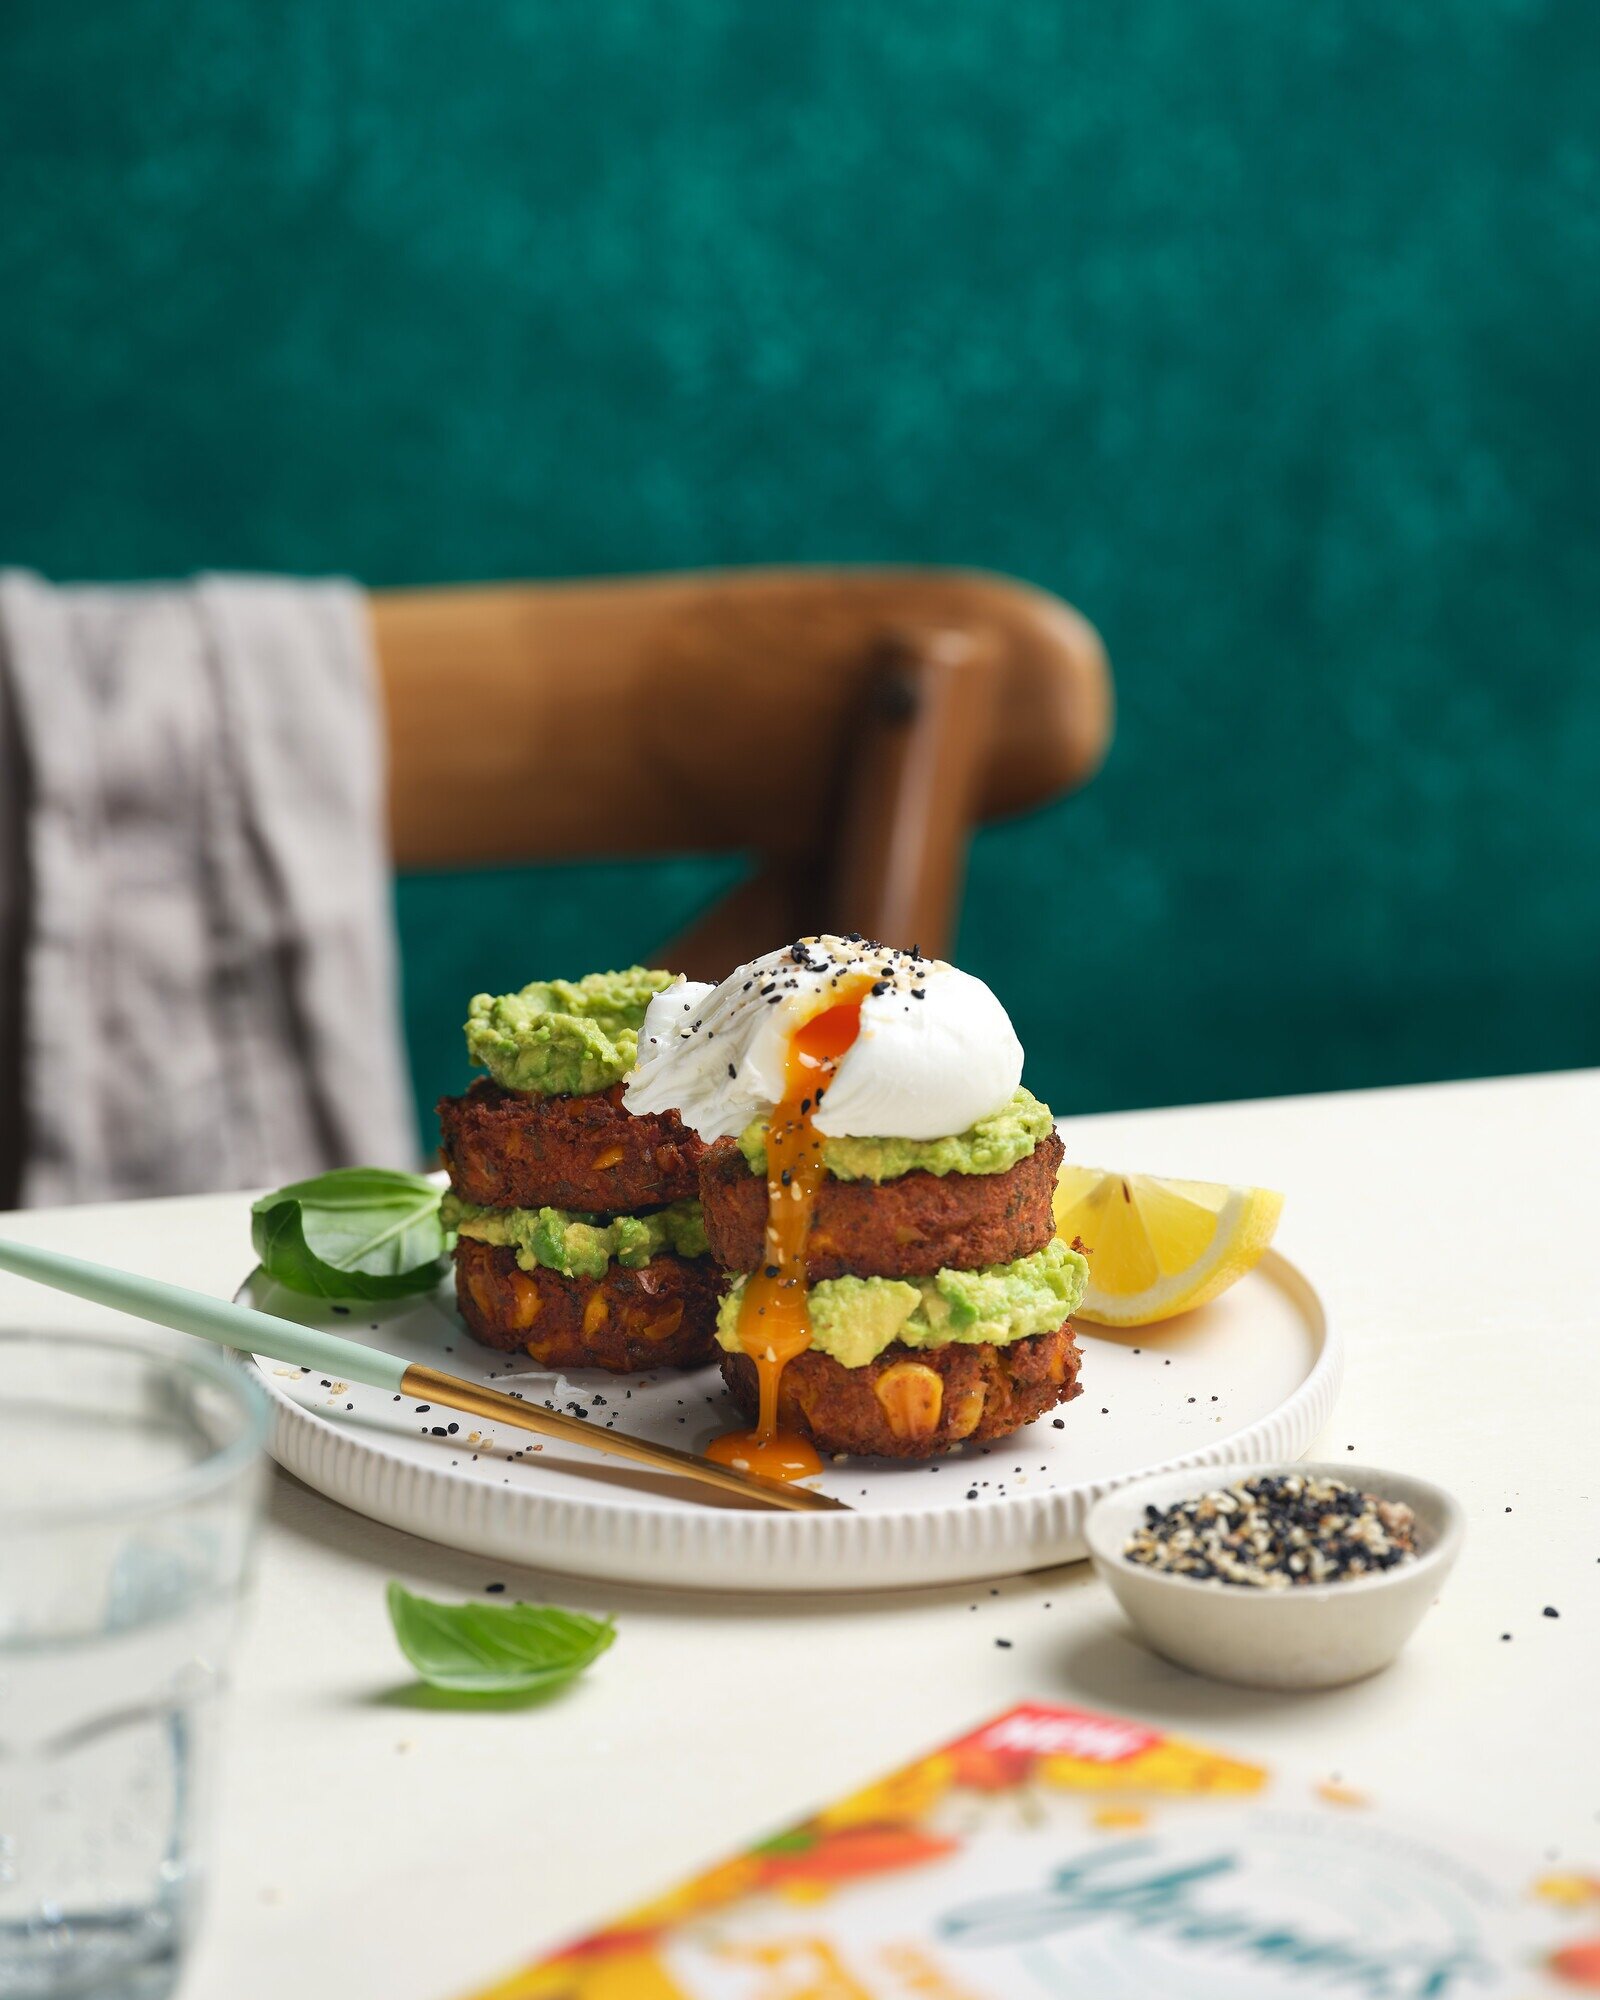 Stacks on! Our tasty new Sweet Corn Fritters make a perfectly balanced breakfast stack. 

Try layering them with fresh, creamy avocado and a gooey poached egg on top.

Exclusive to Coles.

.

.

.

.

#yumis #yumisfritters #fritters #food #healthy #b